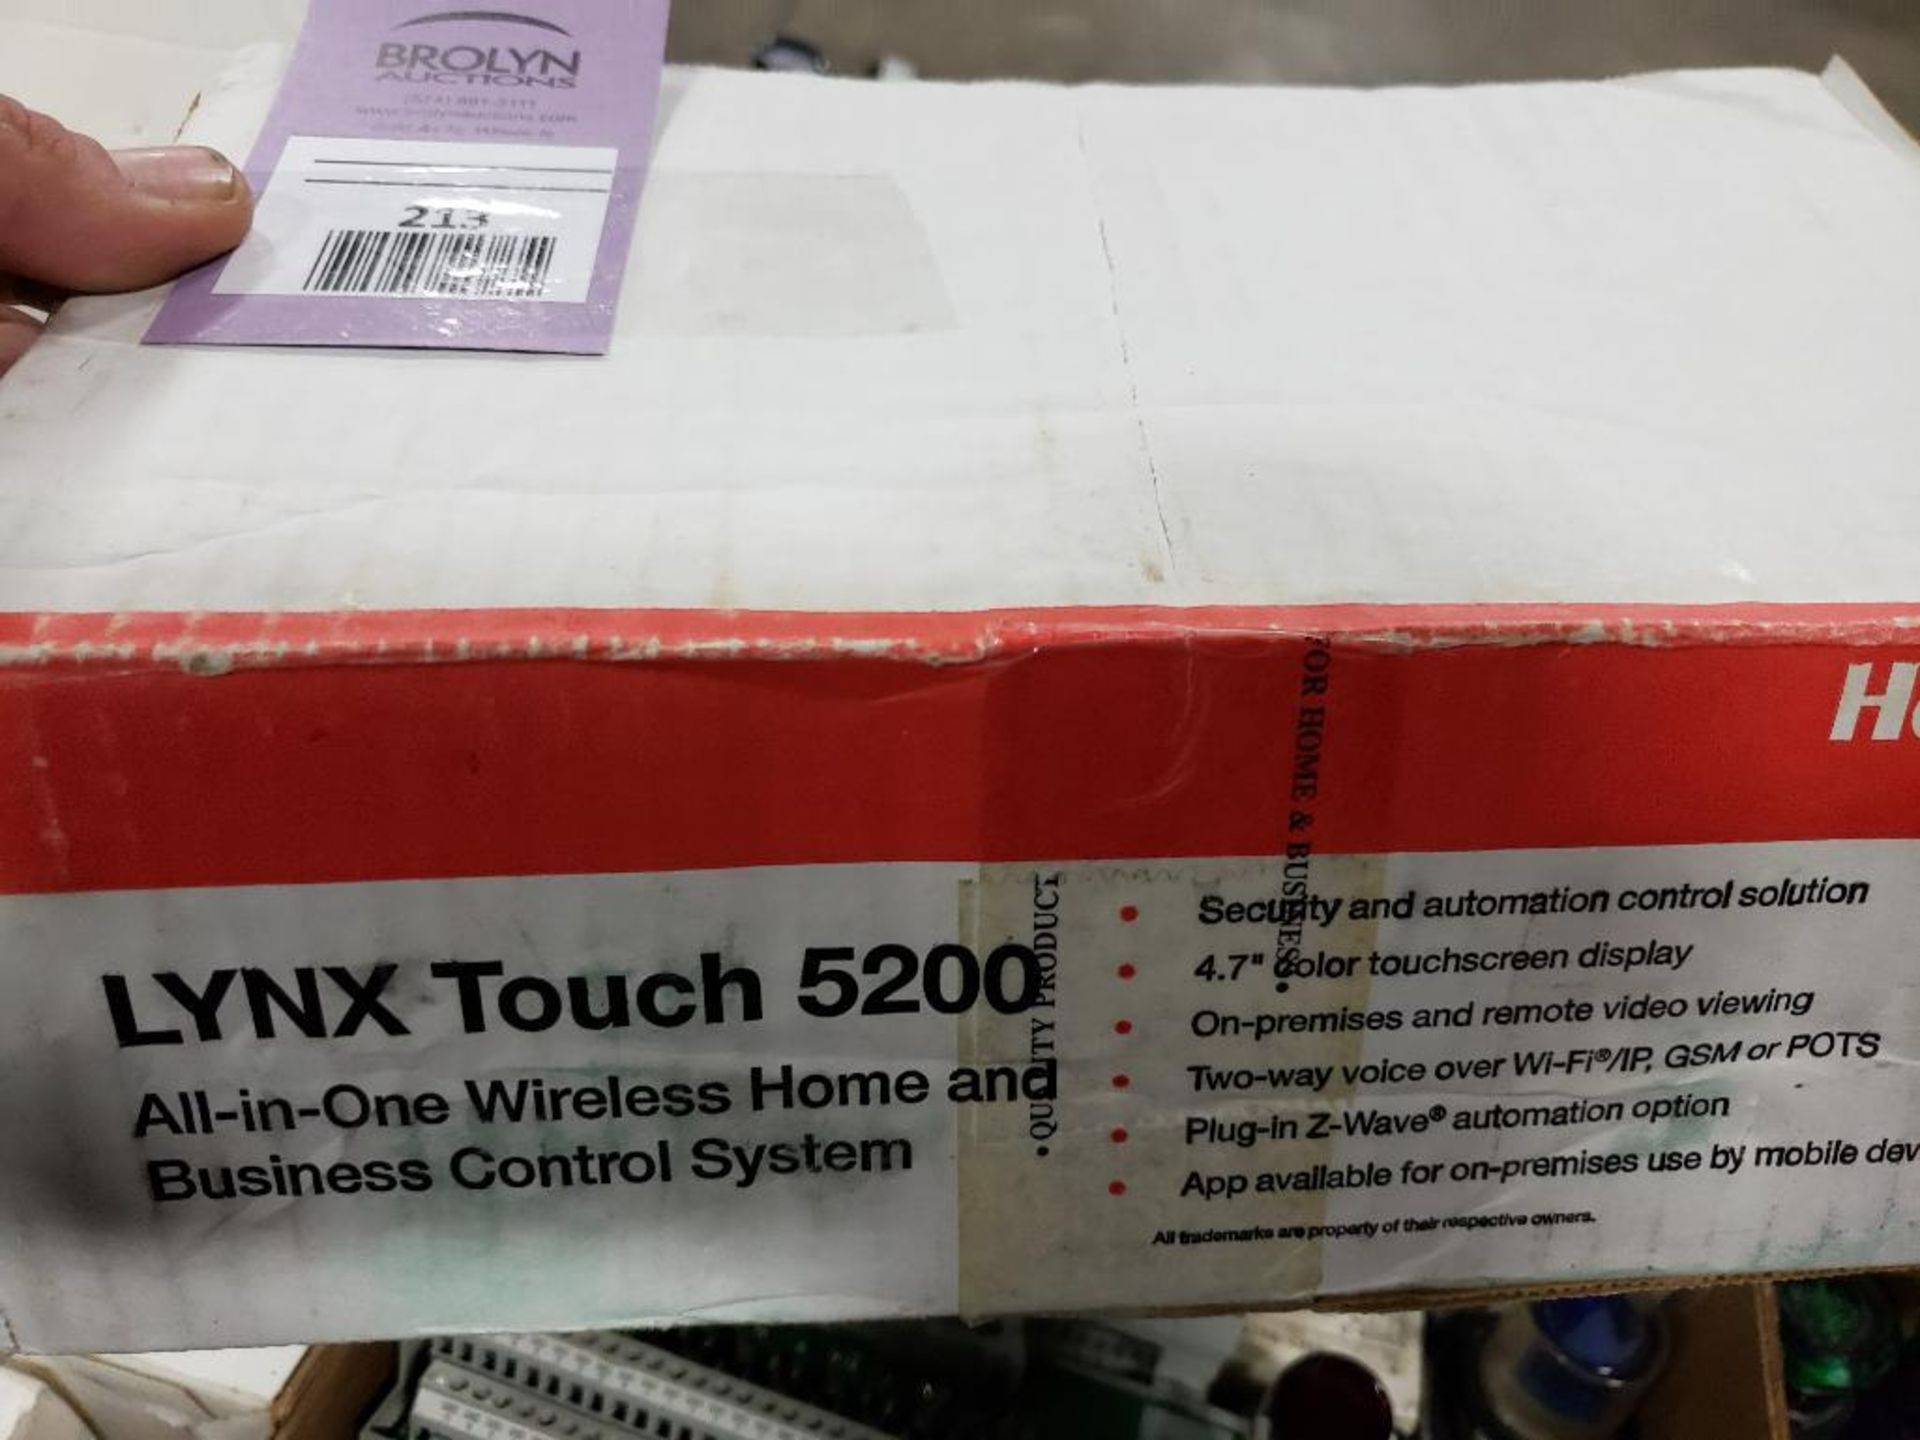 Honeywell LYNX touch L5200/L7000 series security system. New in box.